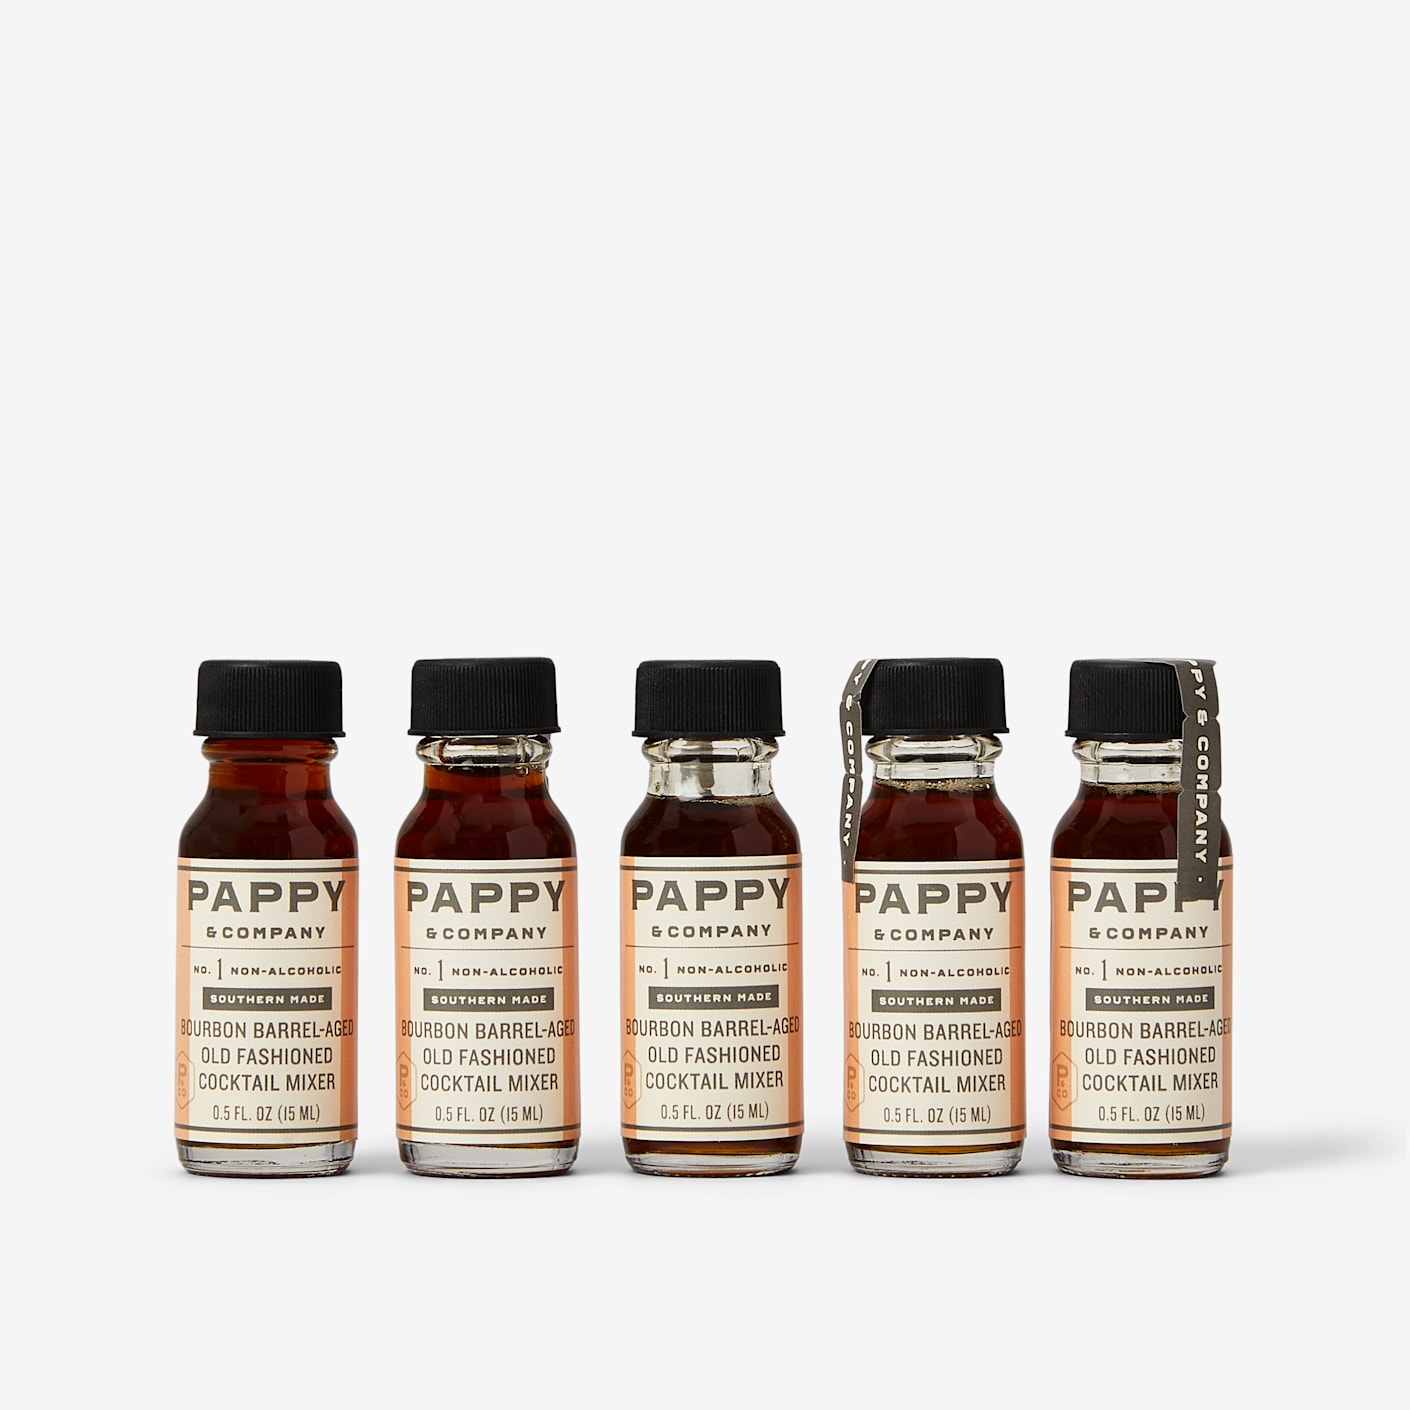 https://dam.bespokepost.com/image/upload/c_limit,dpr_auto,f_auto,q_auto,w_1410/v1/Storefront/2023/04-april/in-house/pappys-pappy-van-winkle-single-serve-old-fashioned-mix-5-pack_2